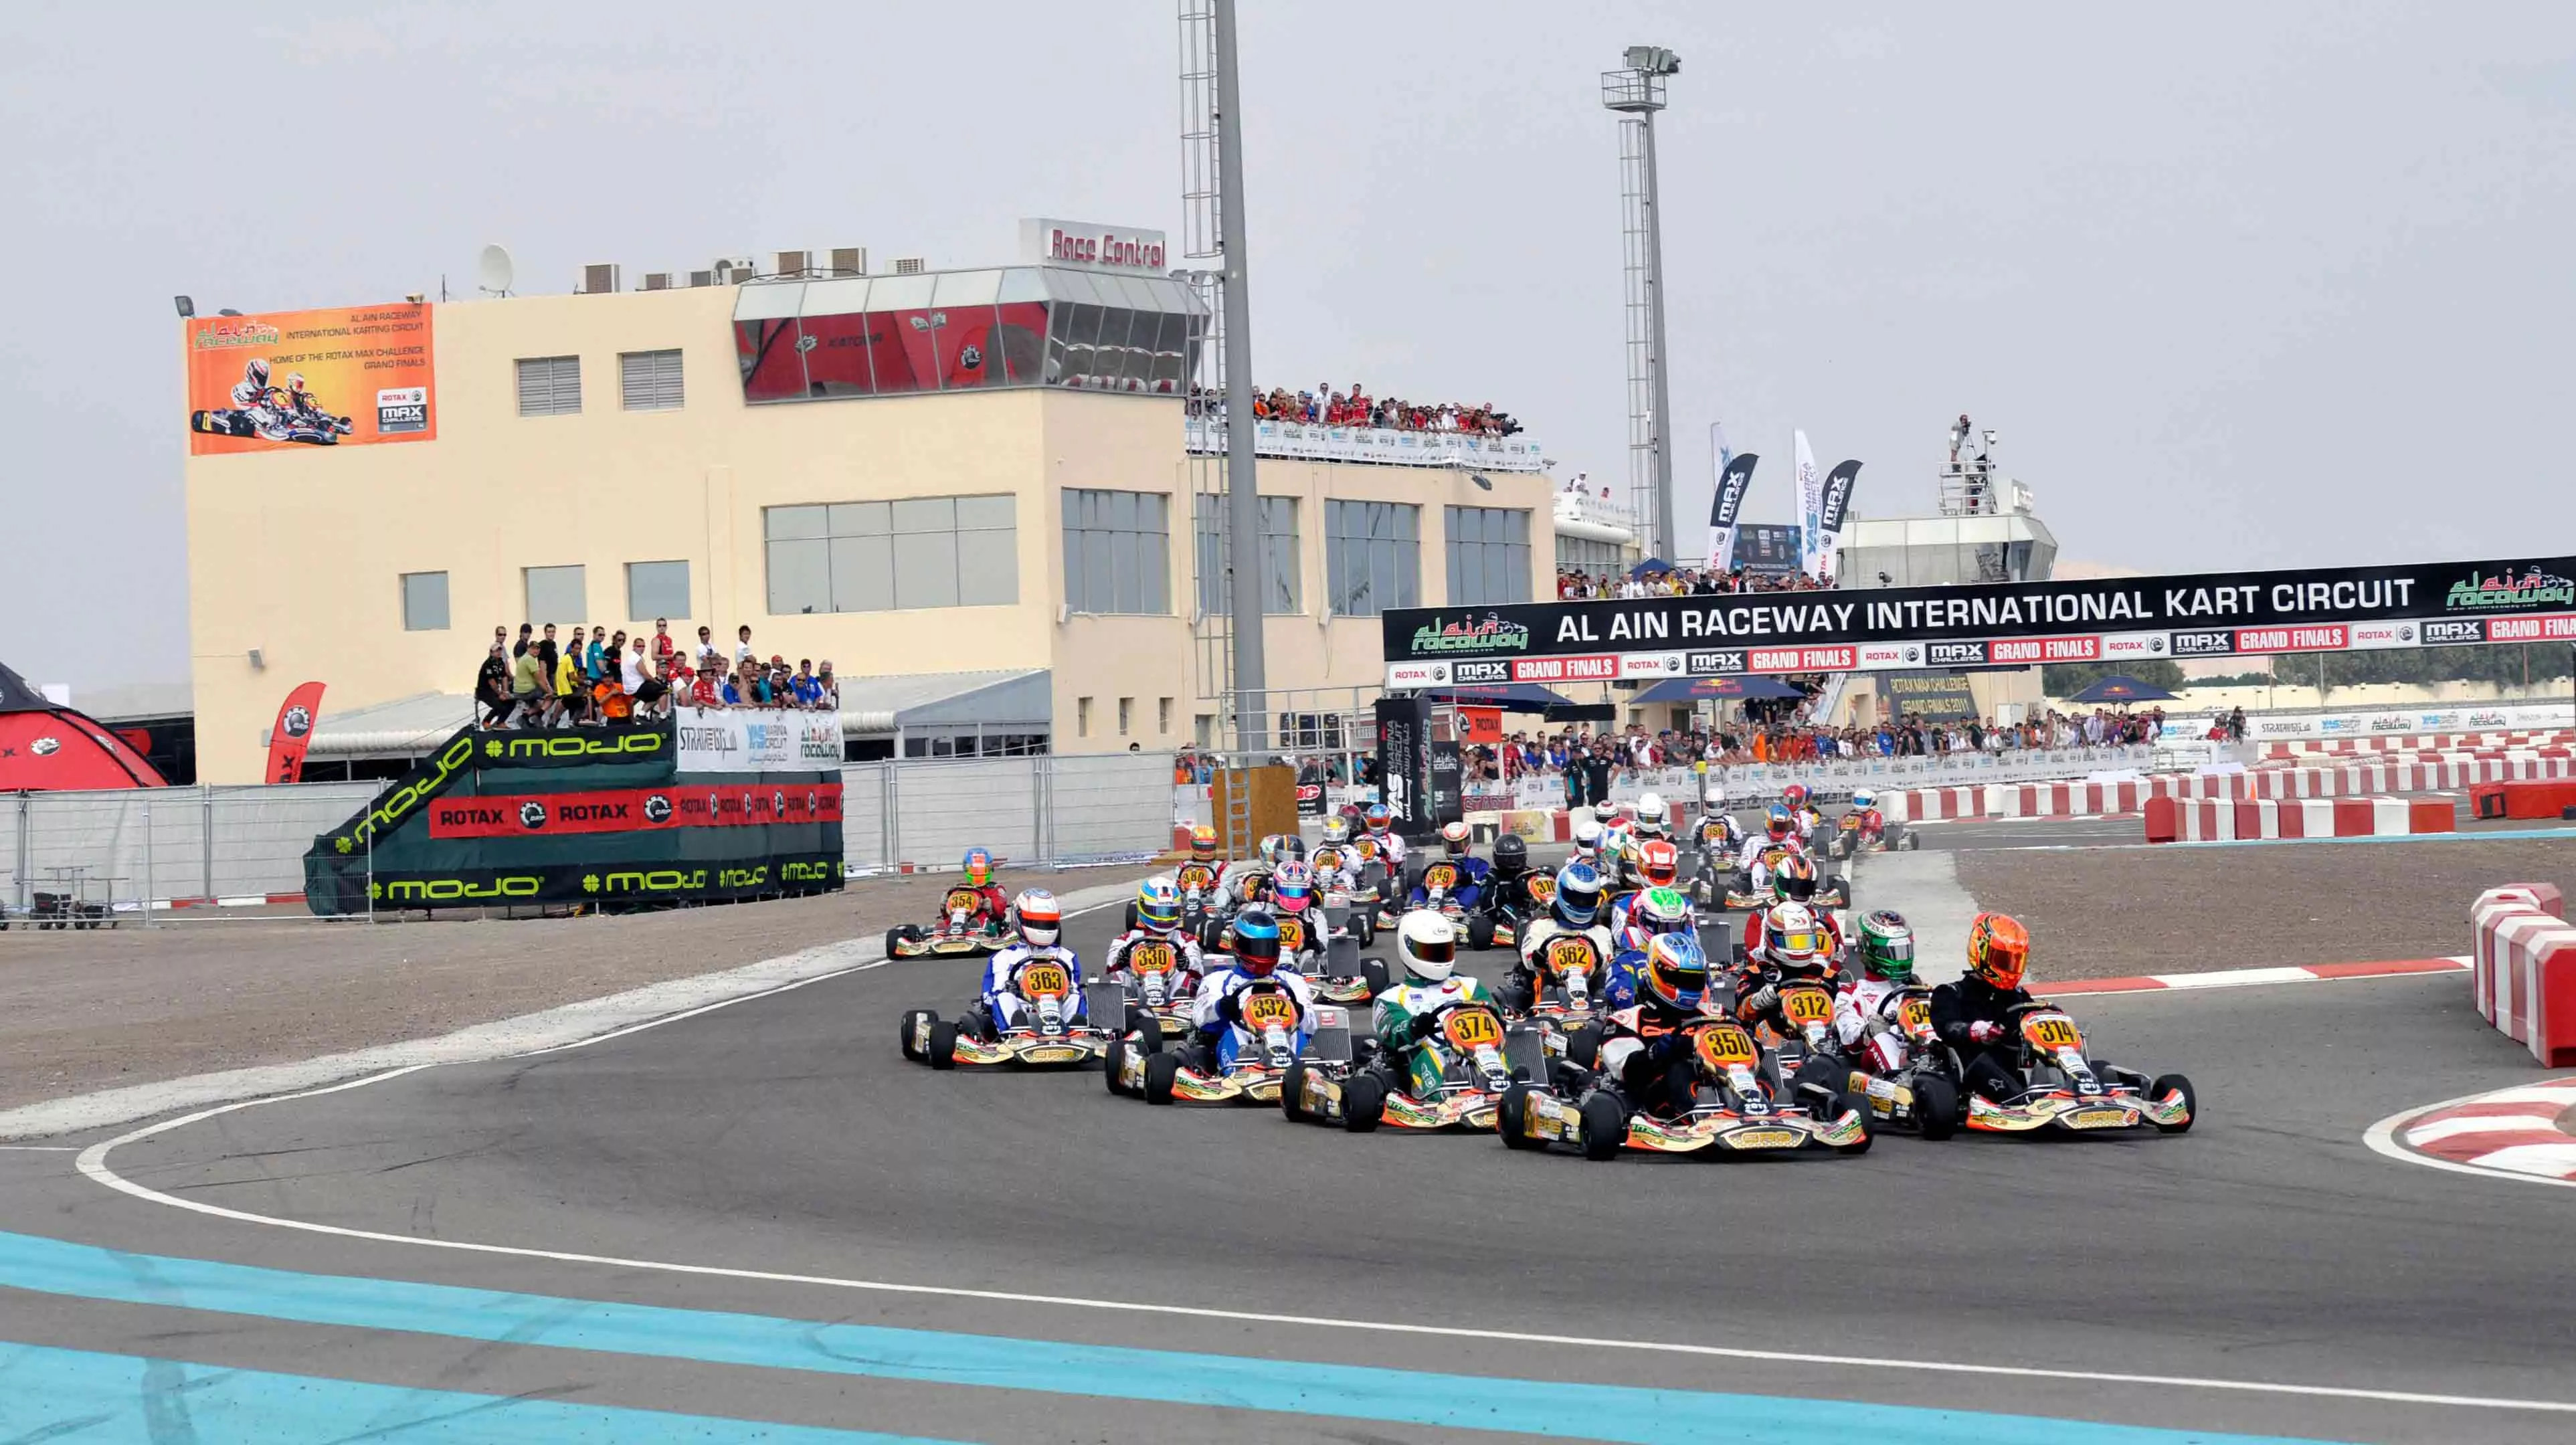 Al Ain Raceway in United Arab Emirates, Middle East | Karting - Rated 3.8